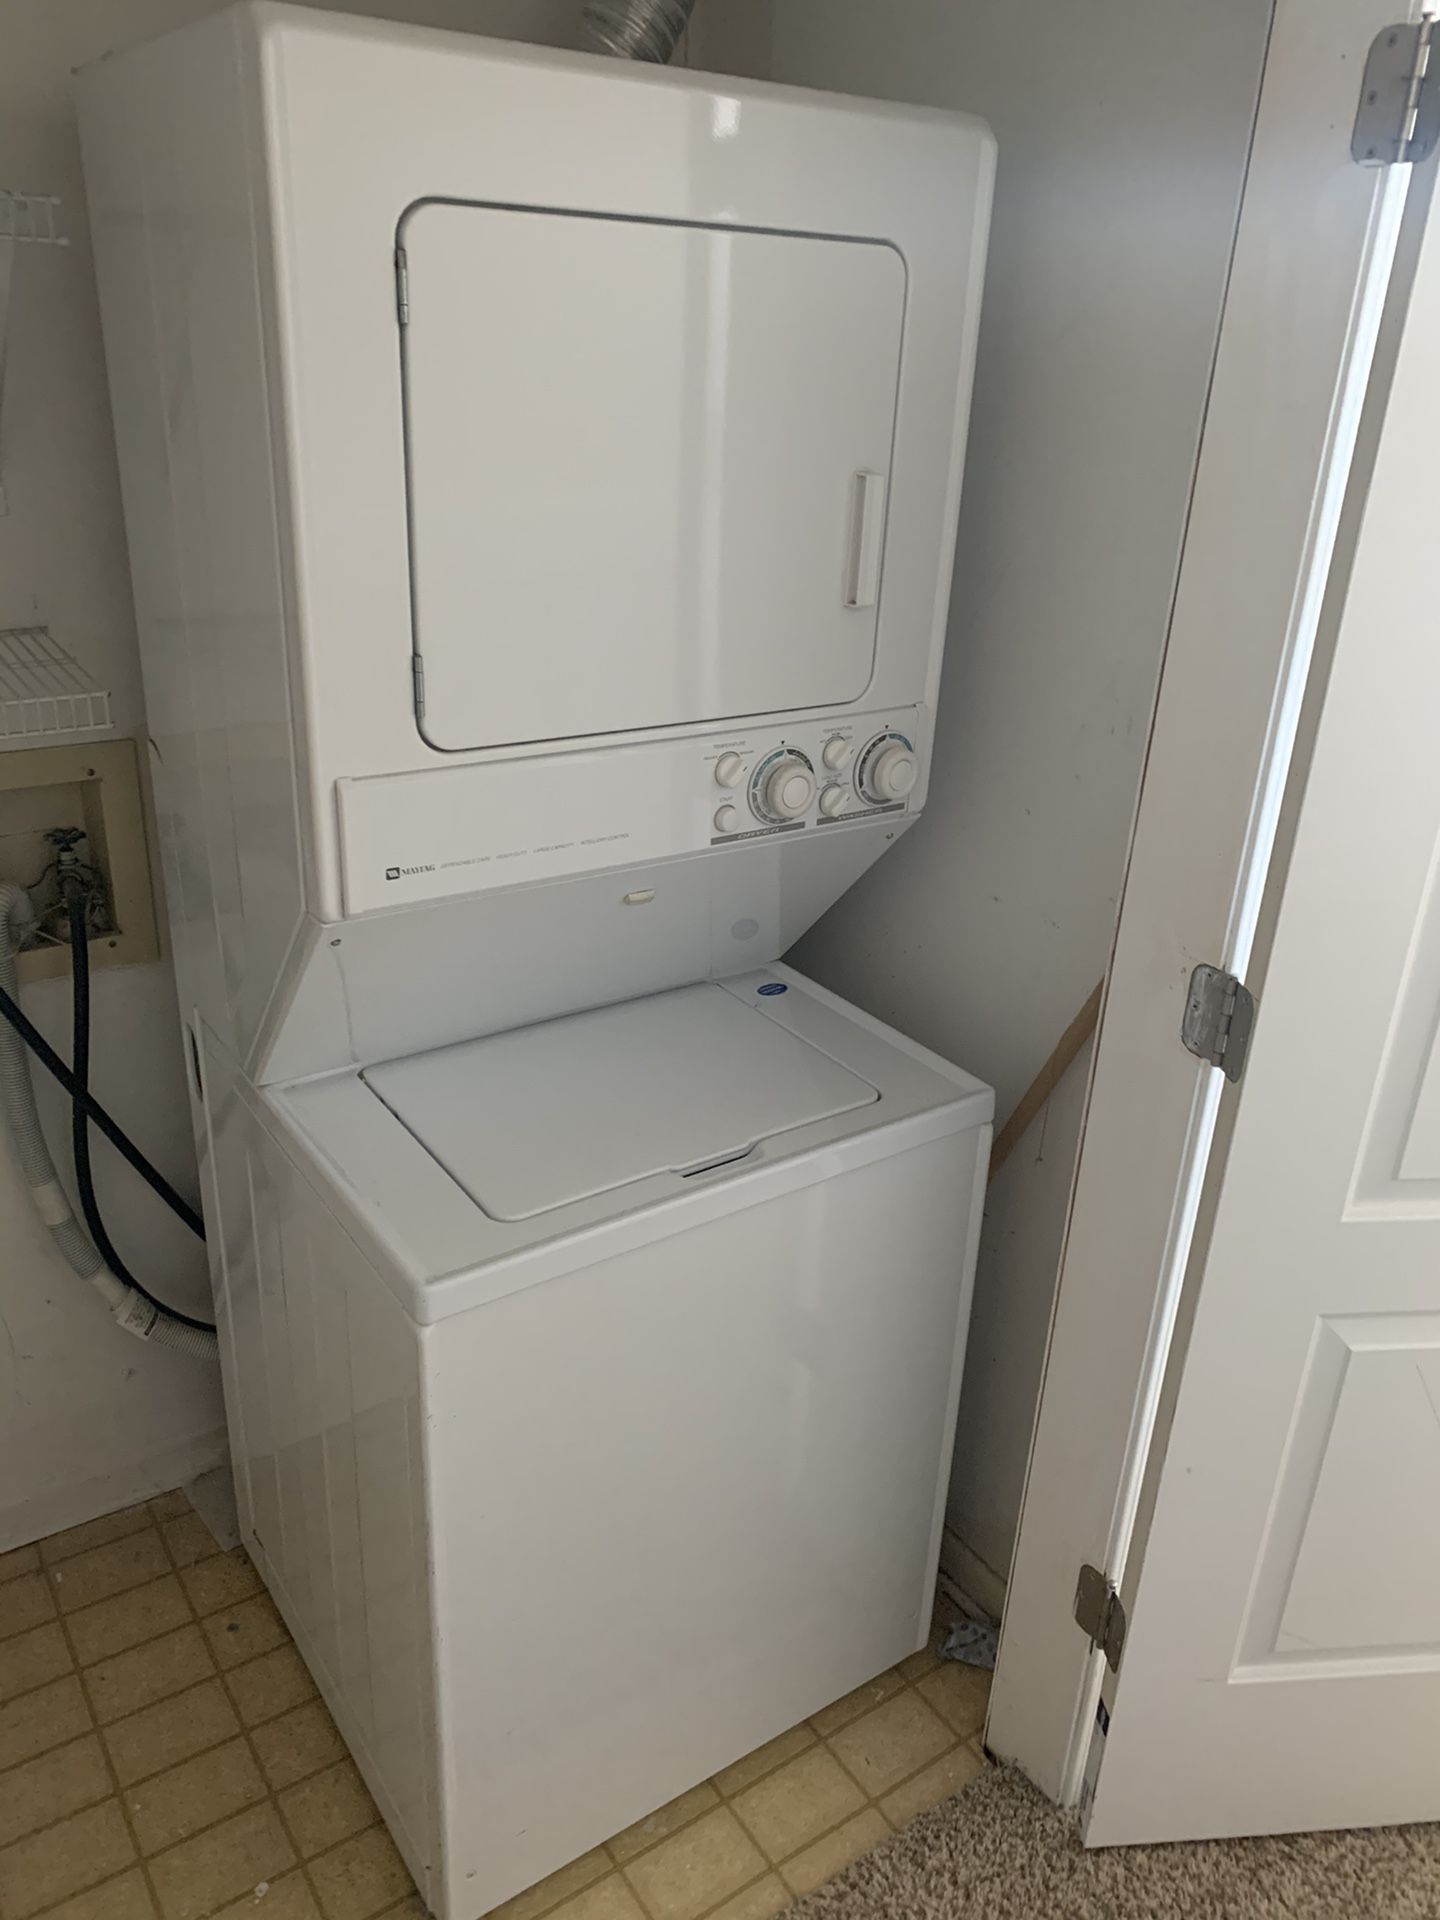 Maytag stackable washer/dryer